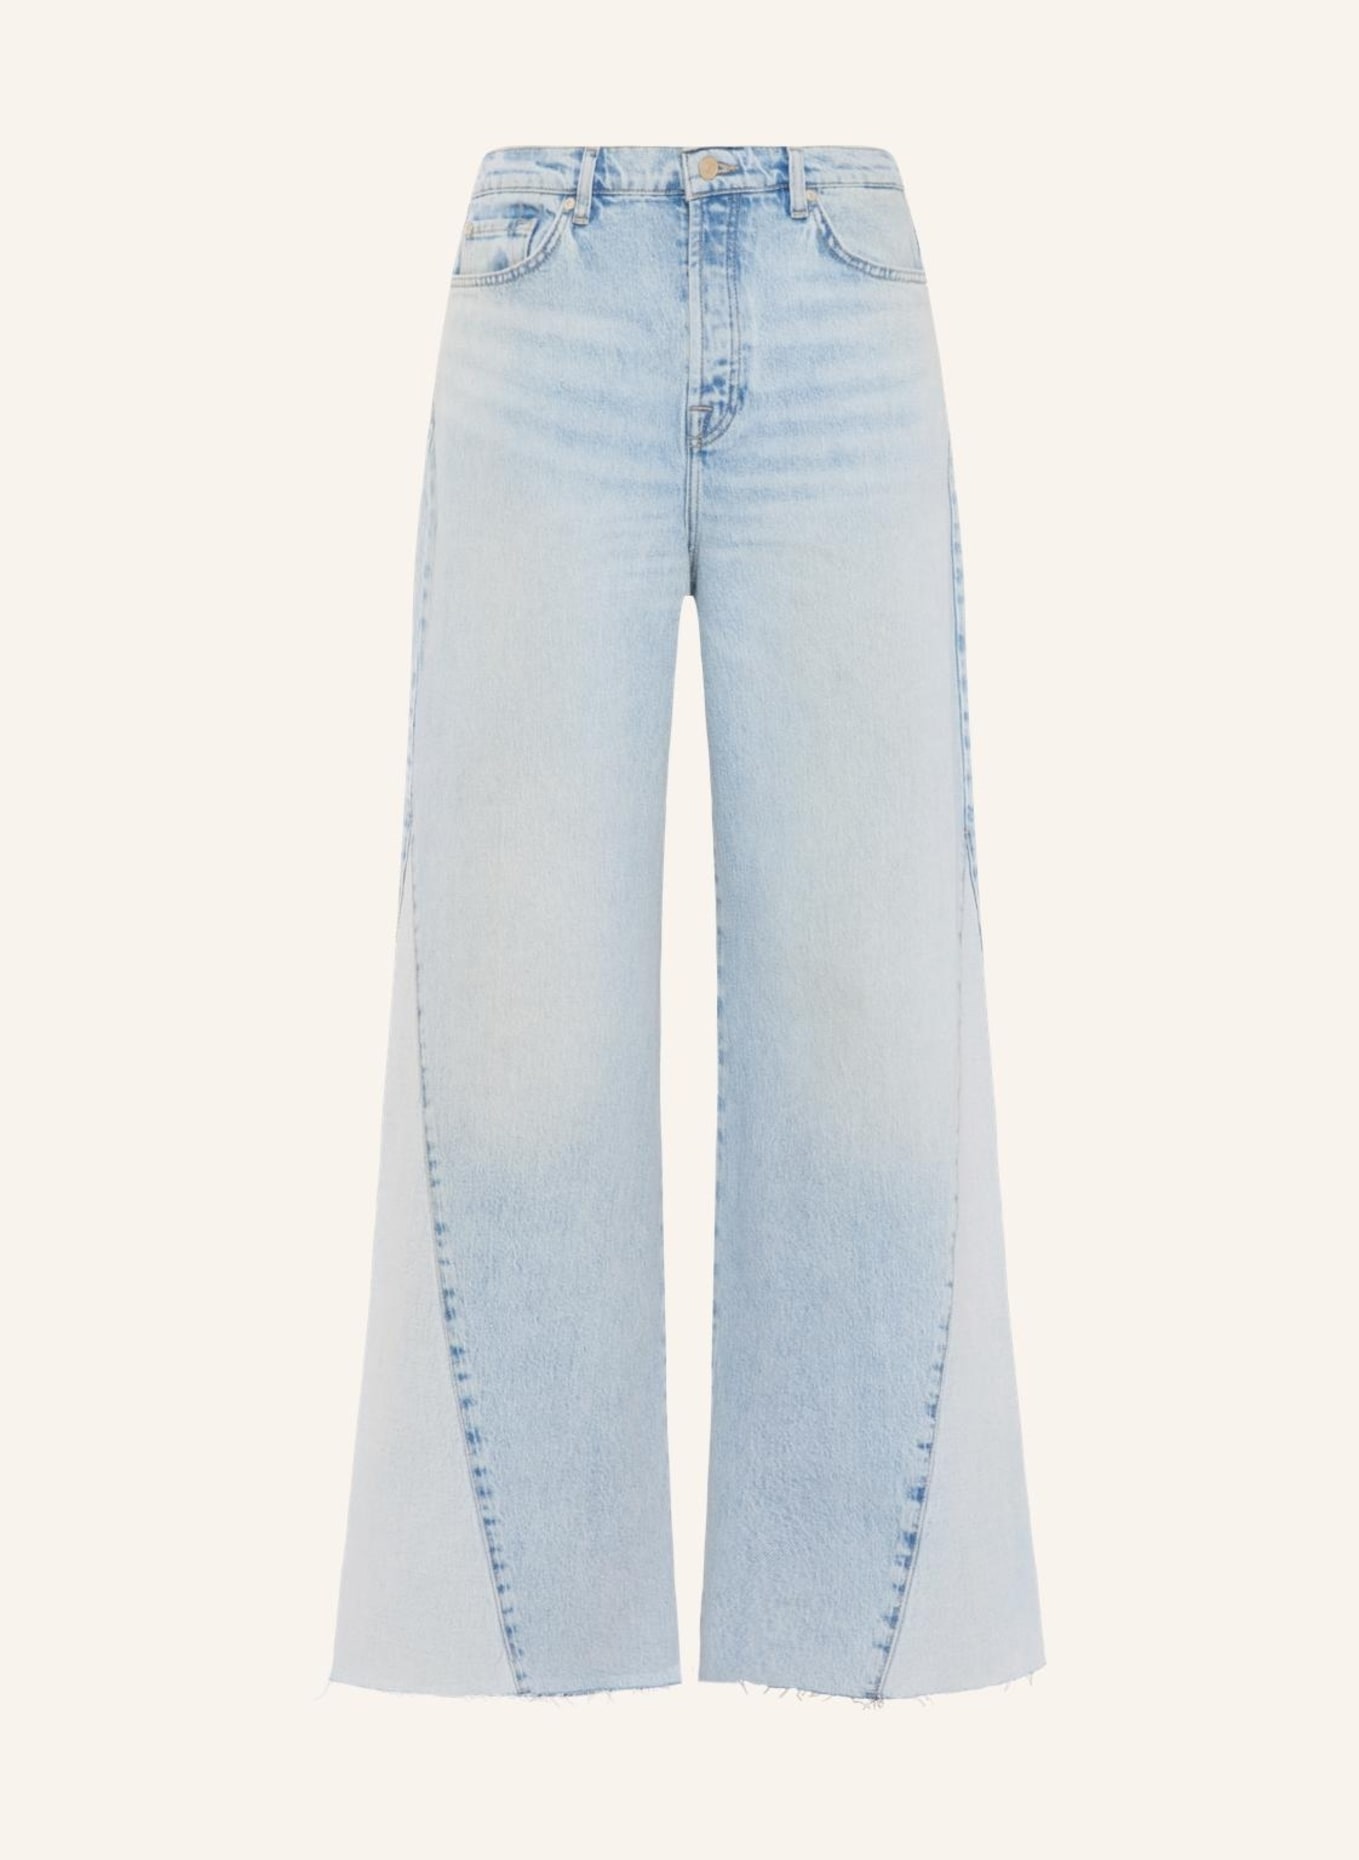 7 for all mankind Jeans ZOEY Flare fit, Farbe: BLAU (Bild 1)